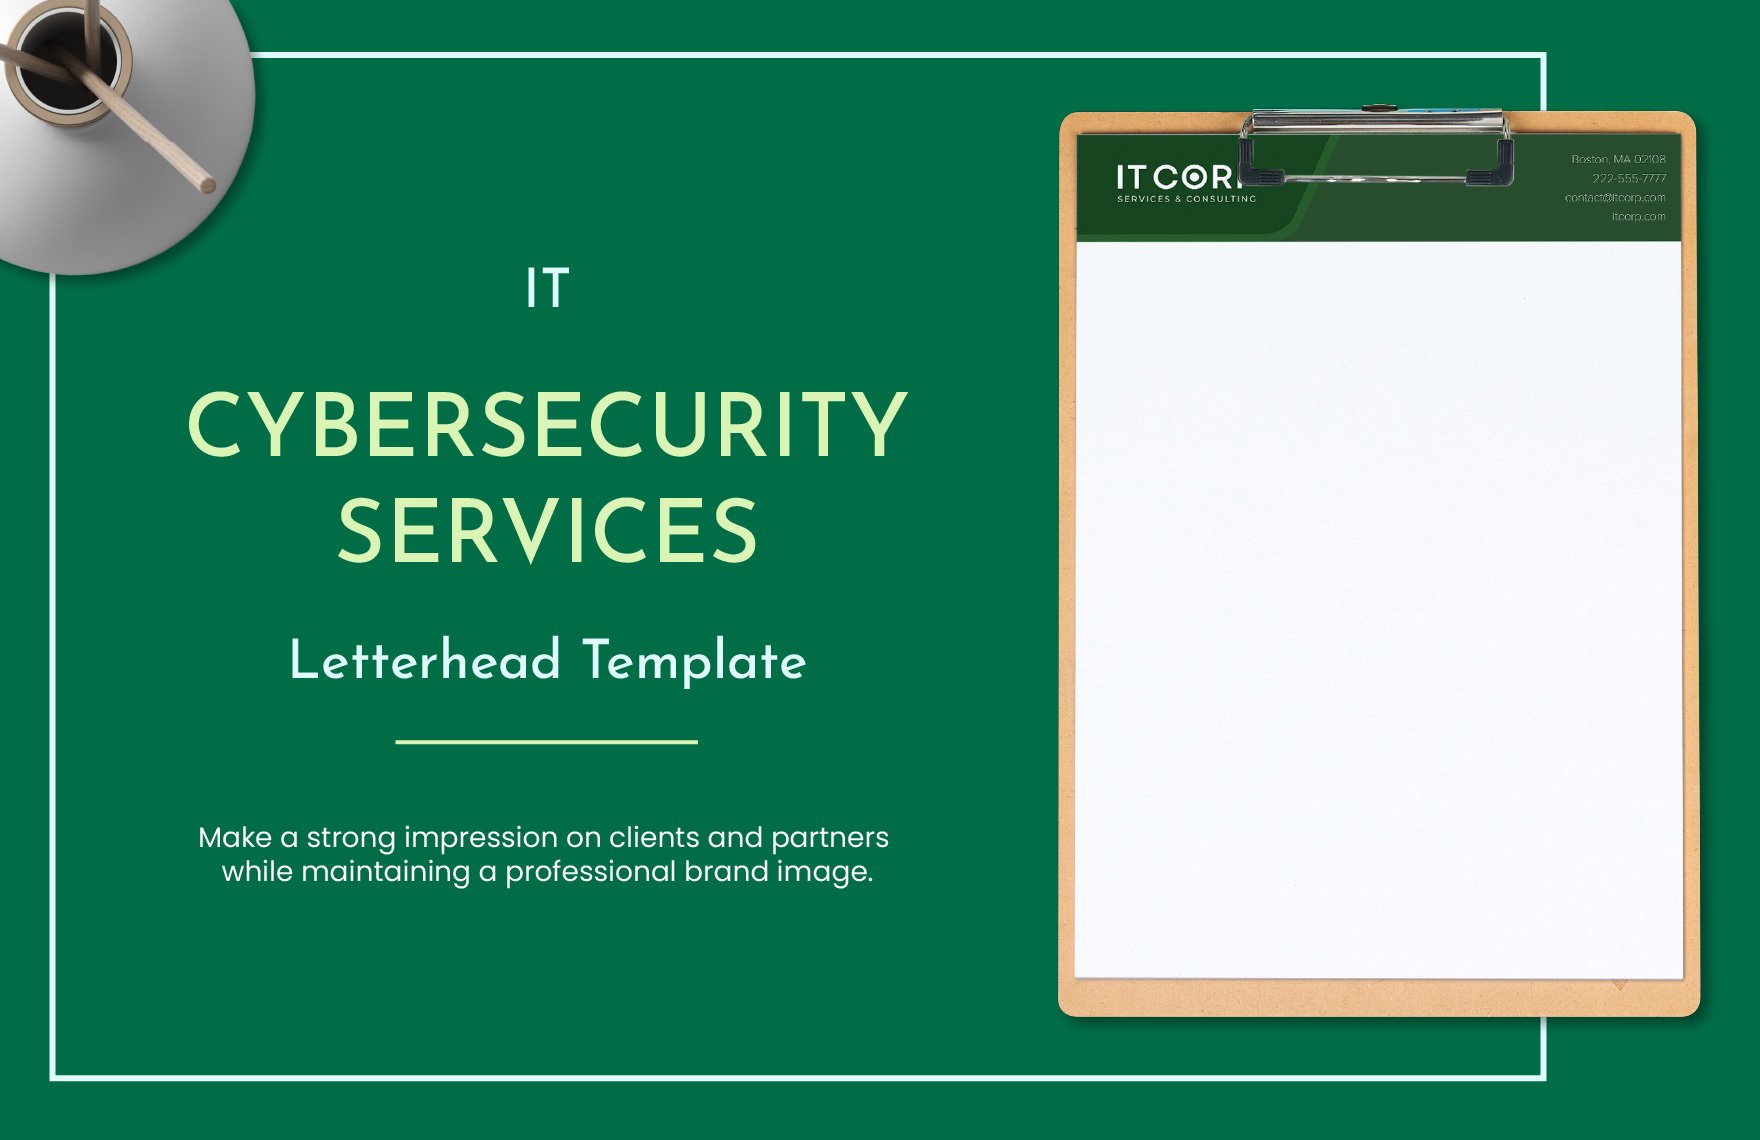 IT Cybersecurity Services Letterhead Template in Word, Illustrator, PSD